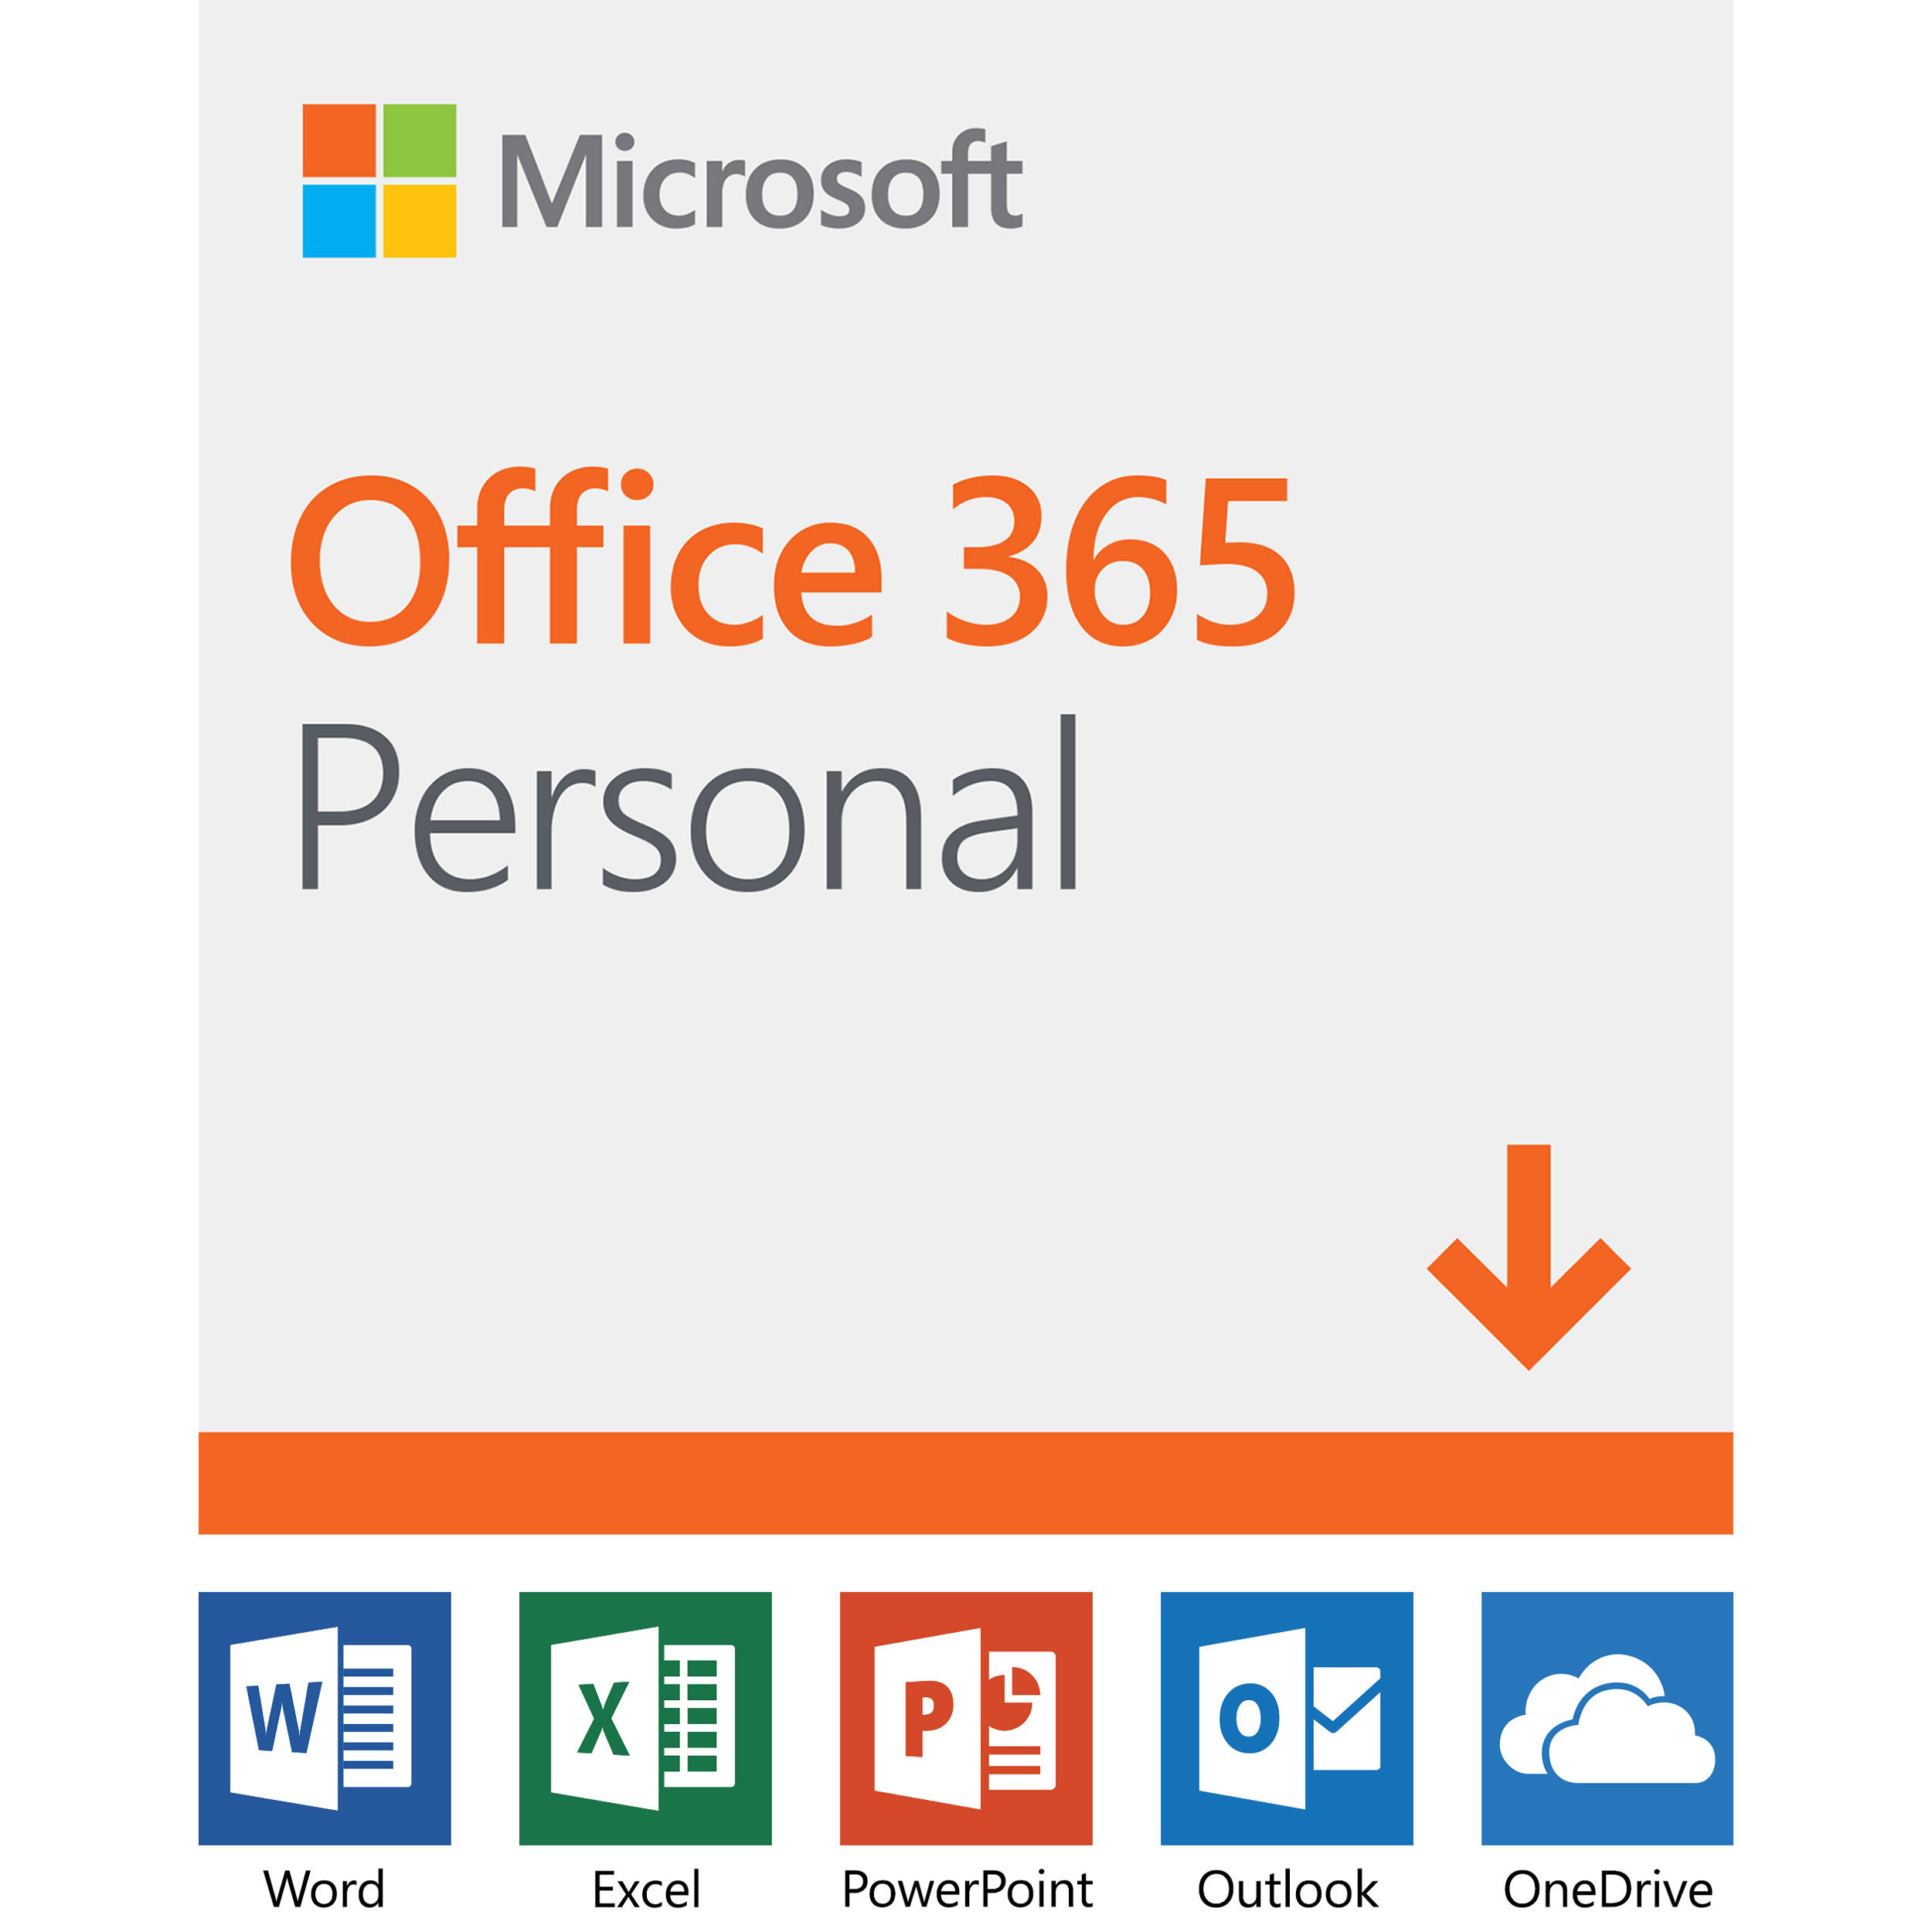 Windows power point office mac office365 os office for mac